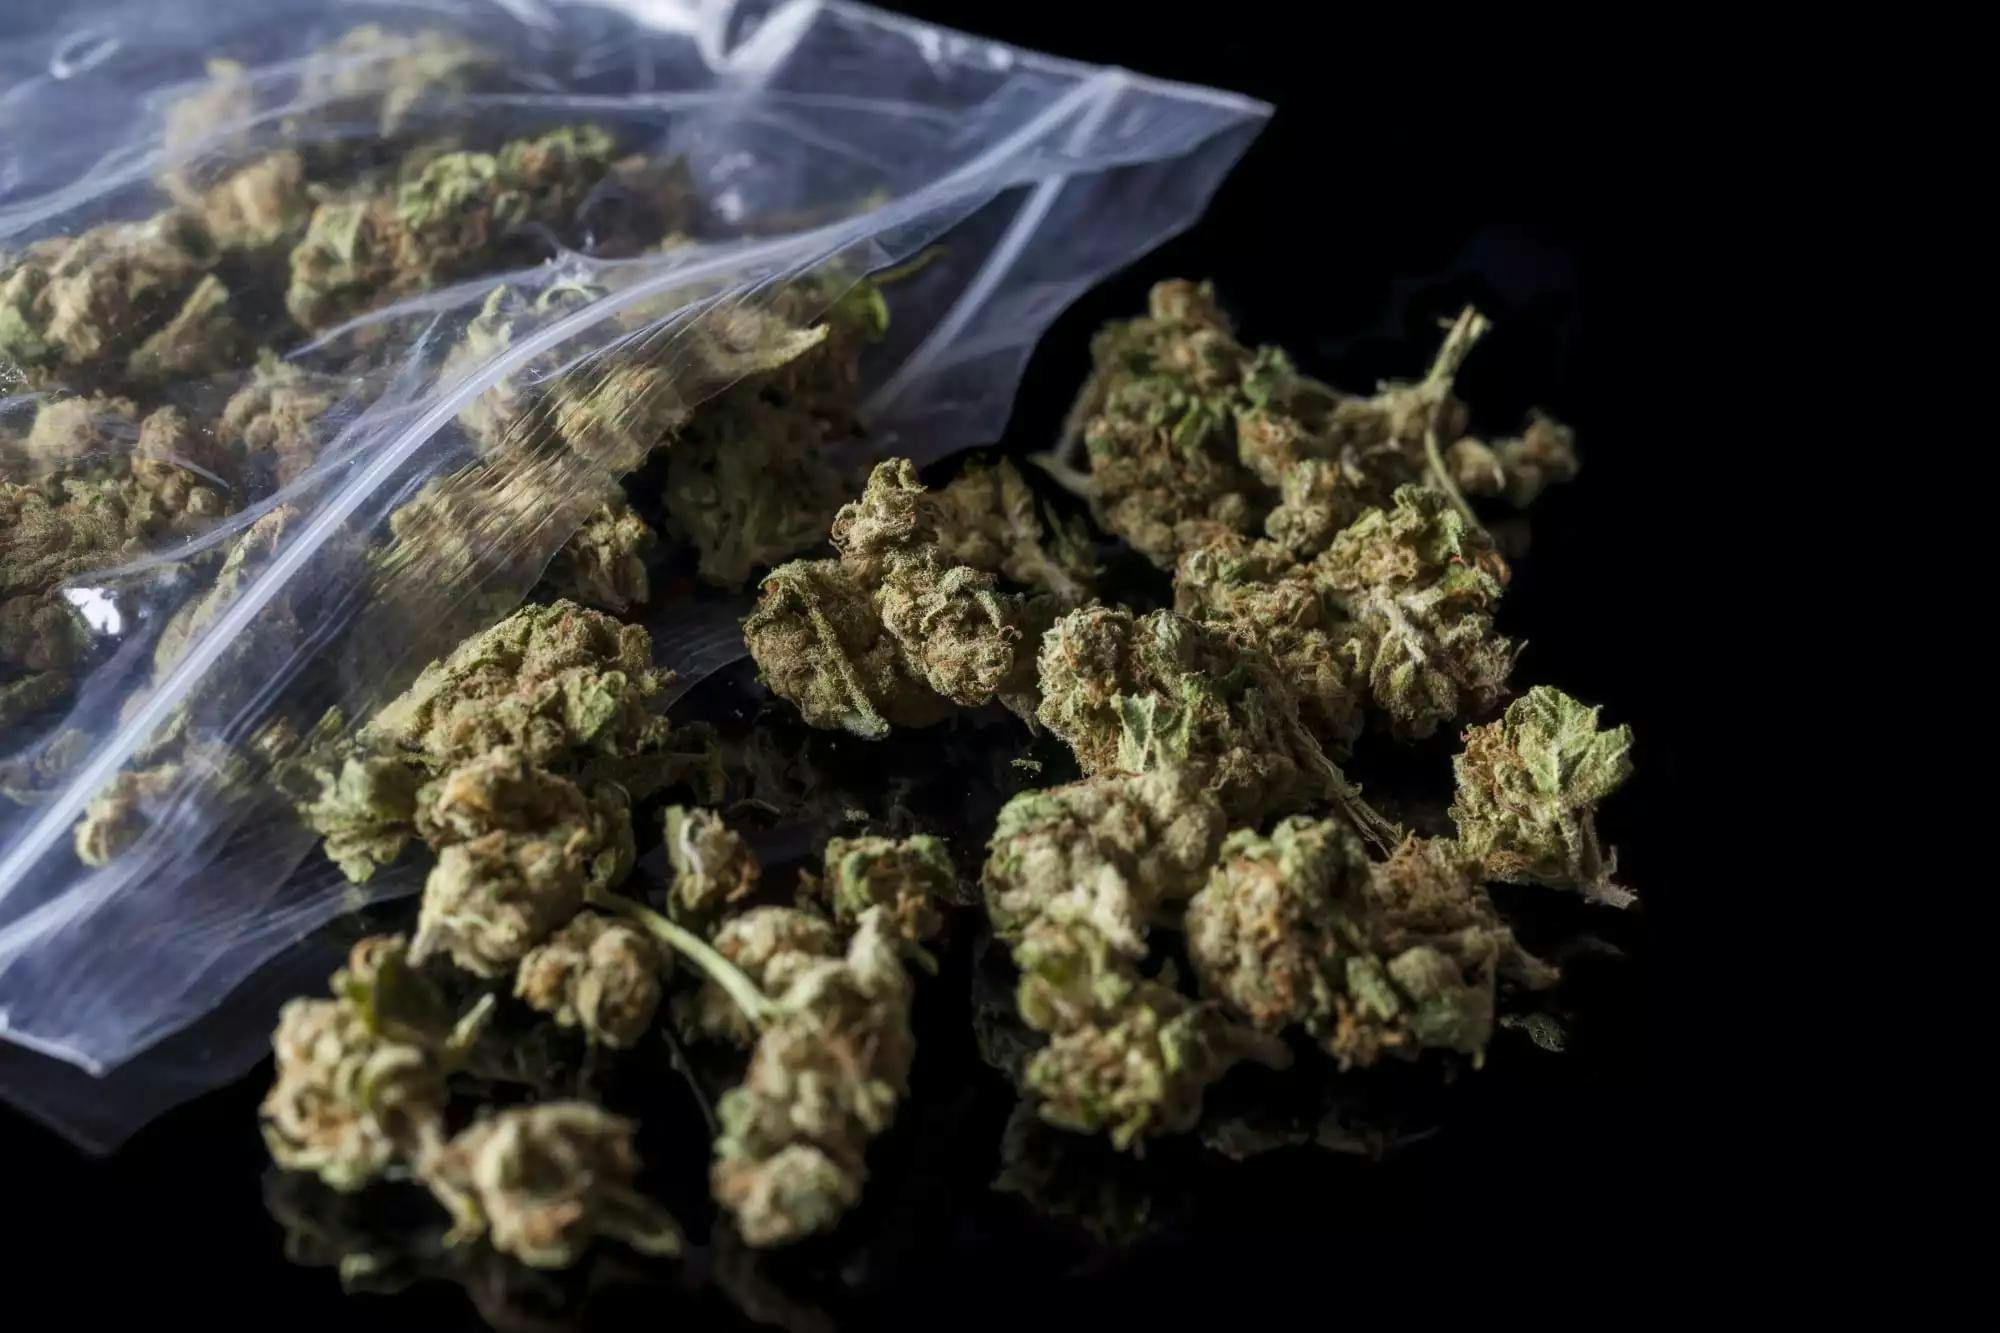 8 Ways To Make the Most of Dispensary Delivery Right To Your Home